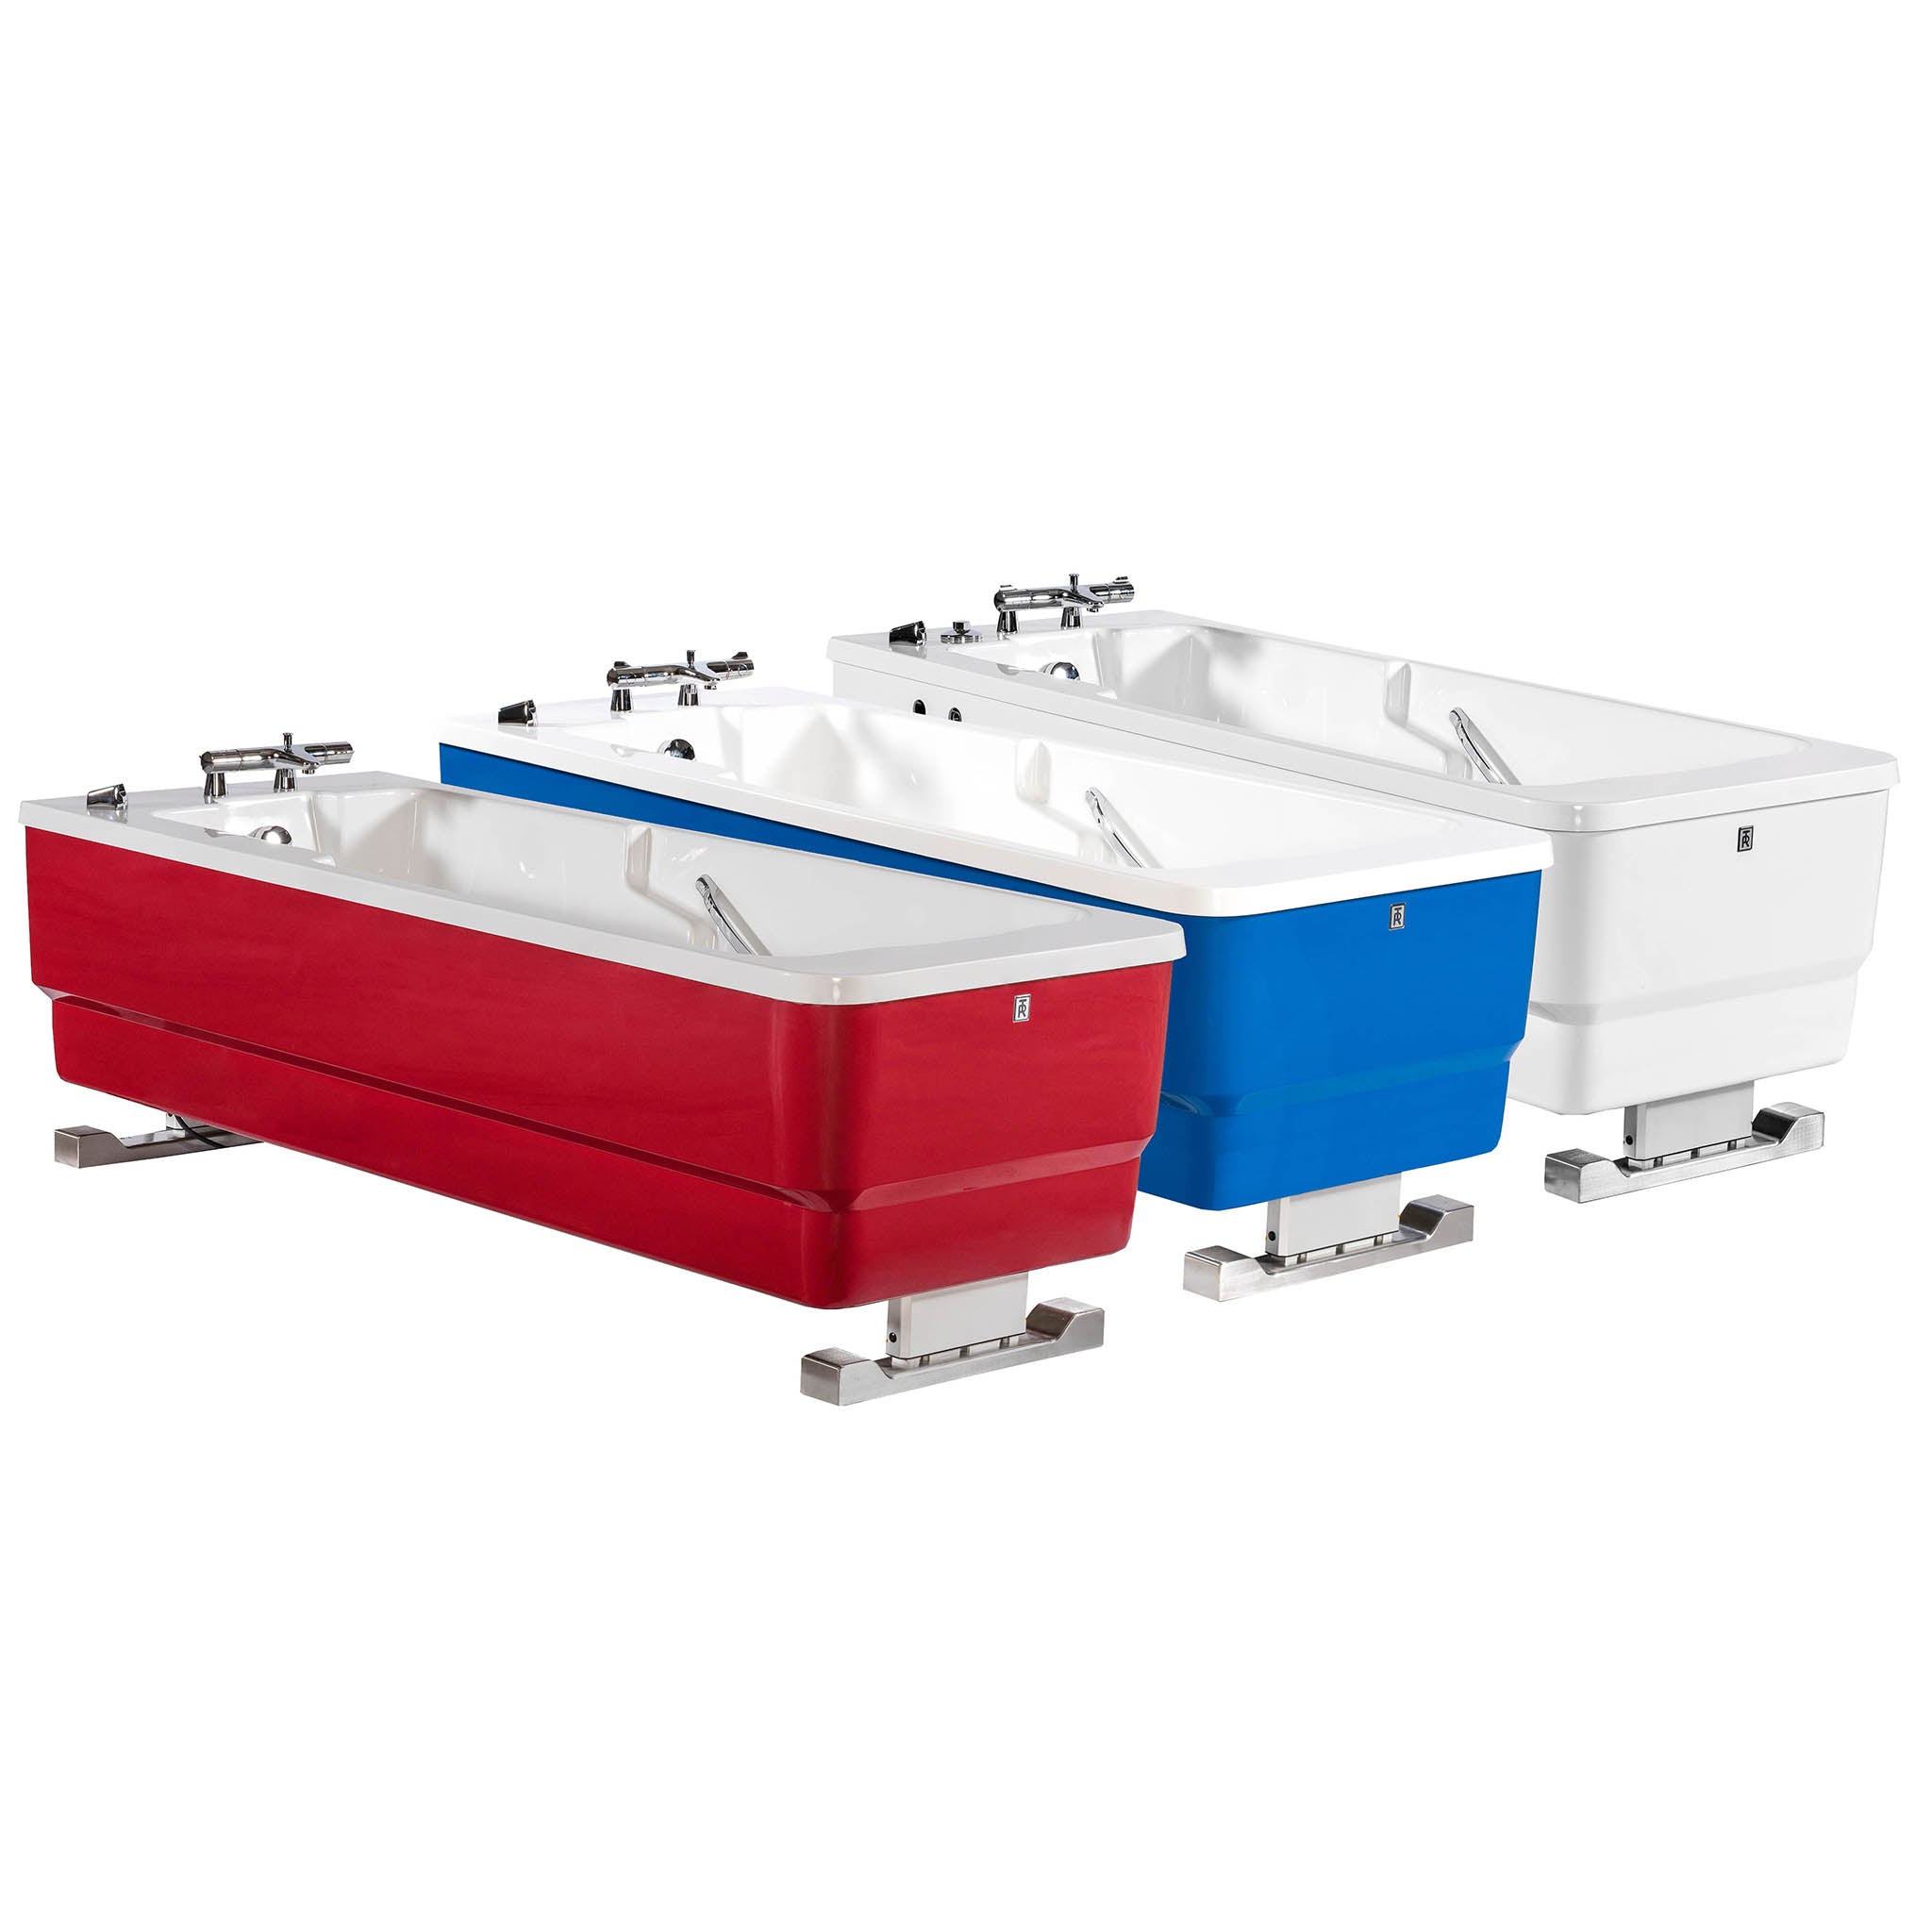 TR Equipment Cleaning and Disinfection Feature for Comfortline bathtubs